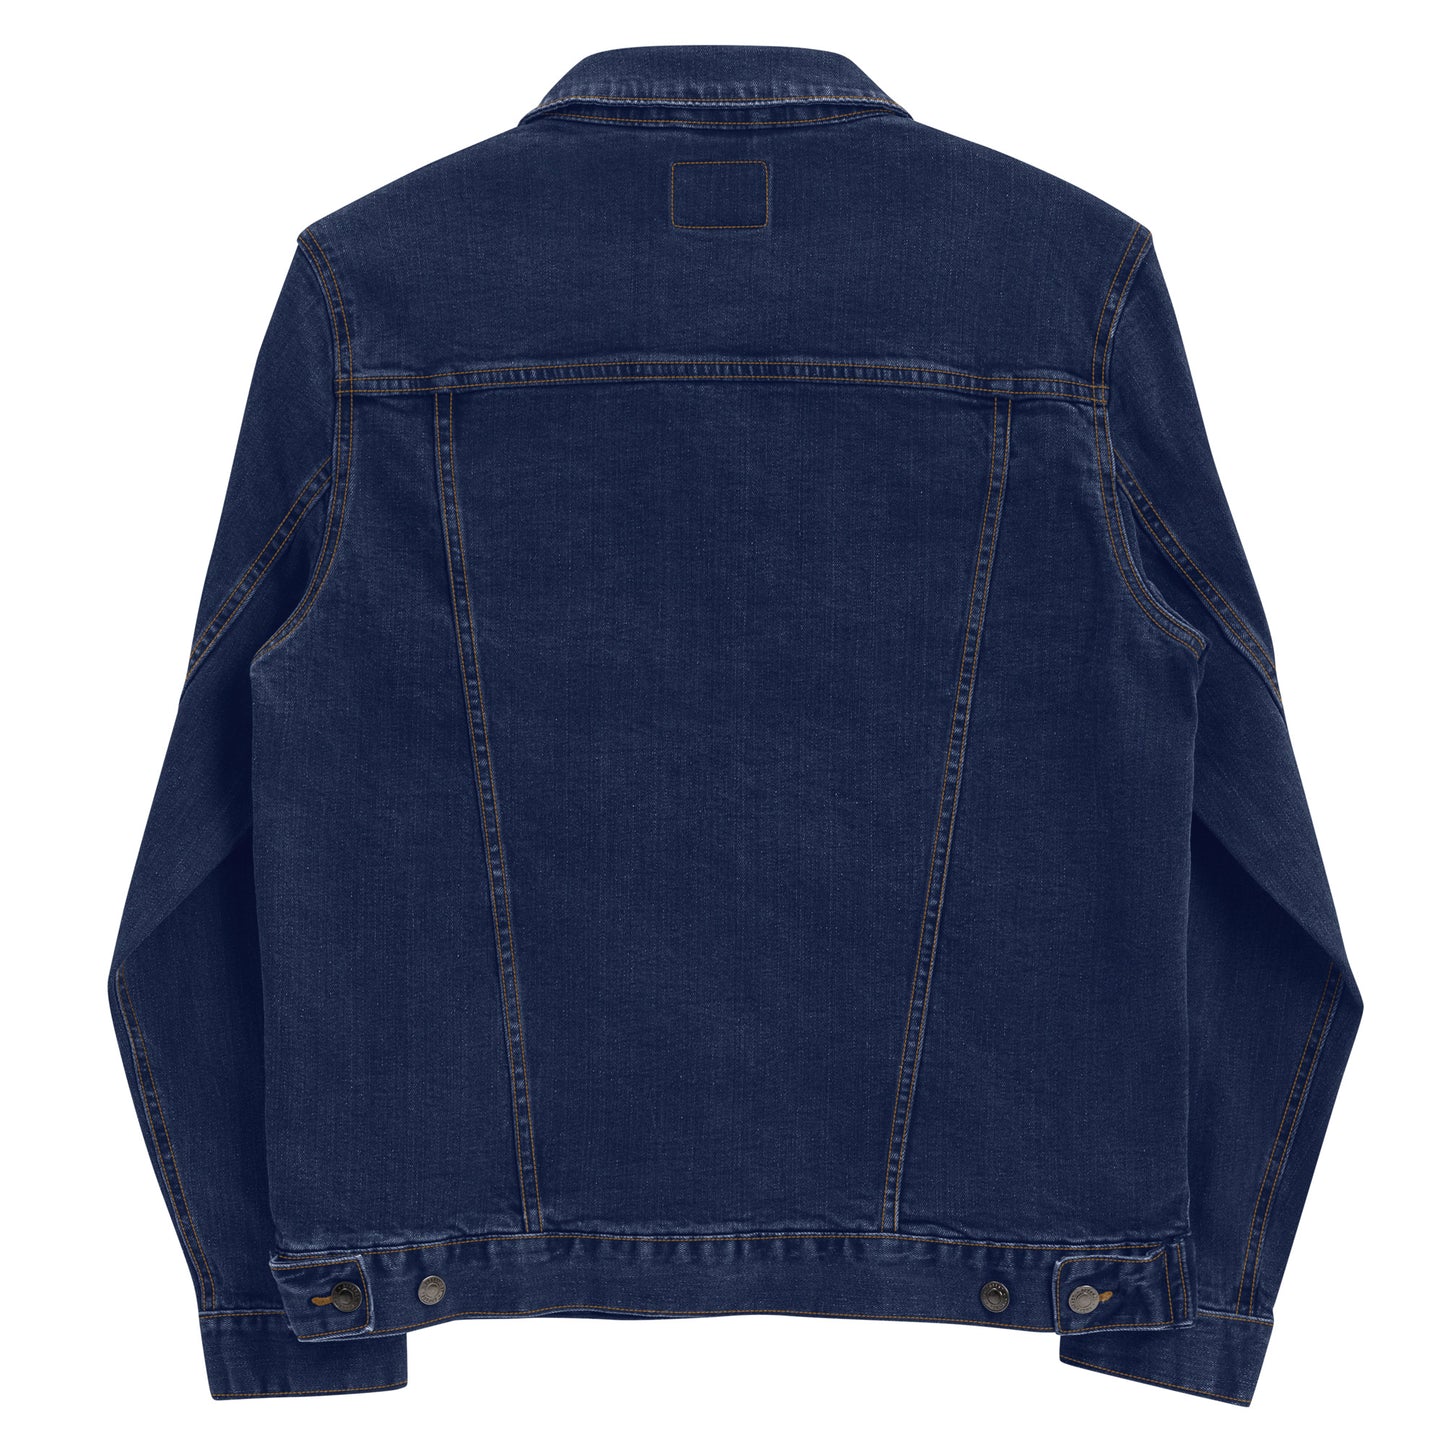 Welcome To Mexico denim jacket